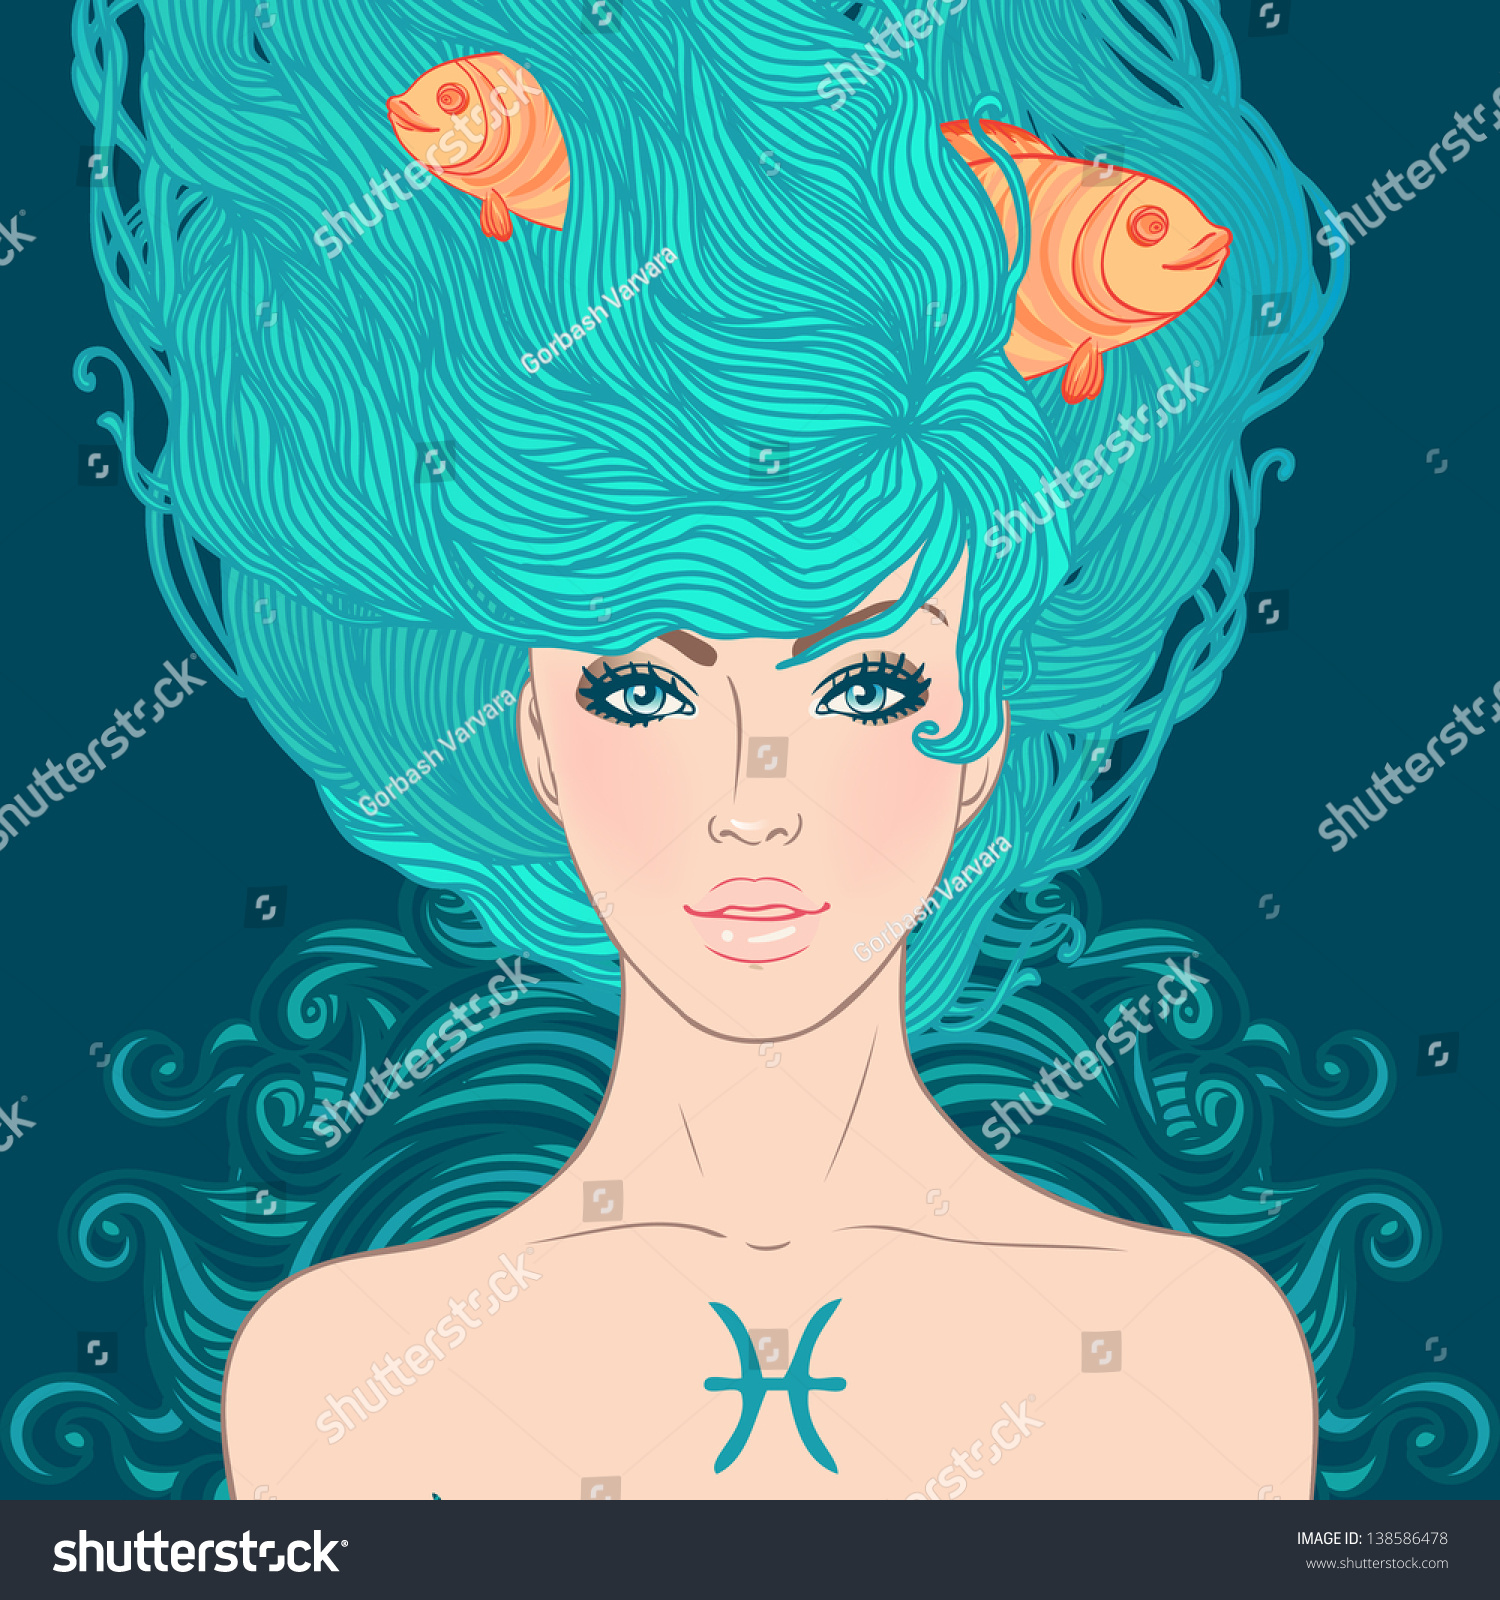 Illustration Of Pisces Astrological Sign As A Beautiful Girl. Vector ...